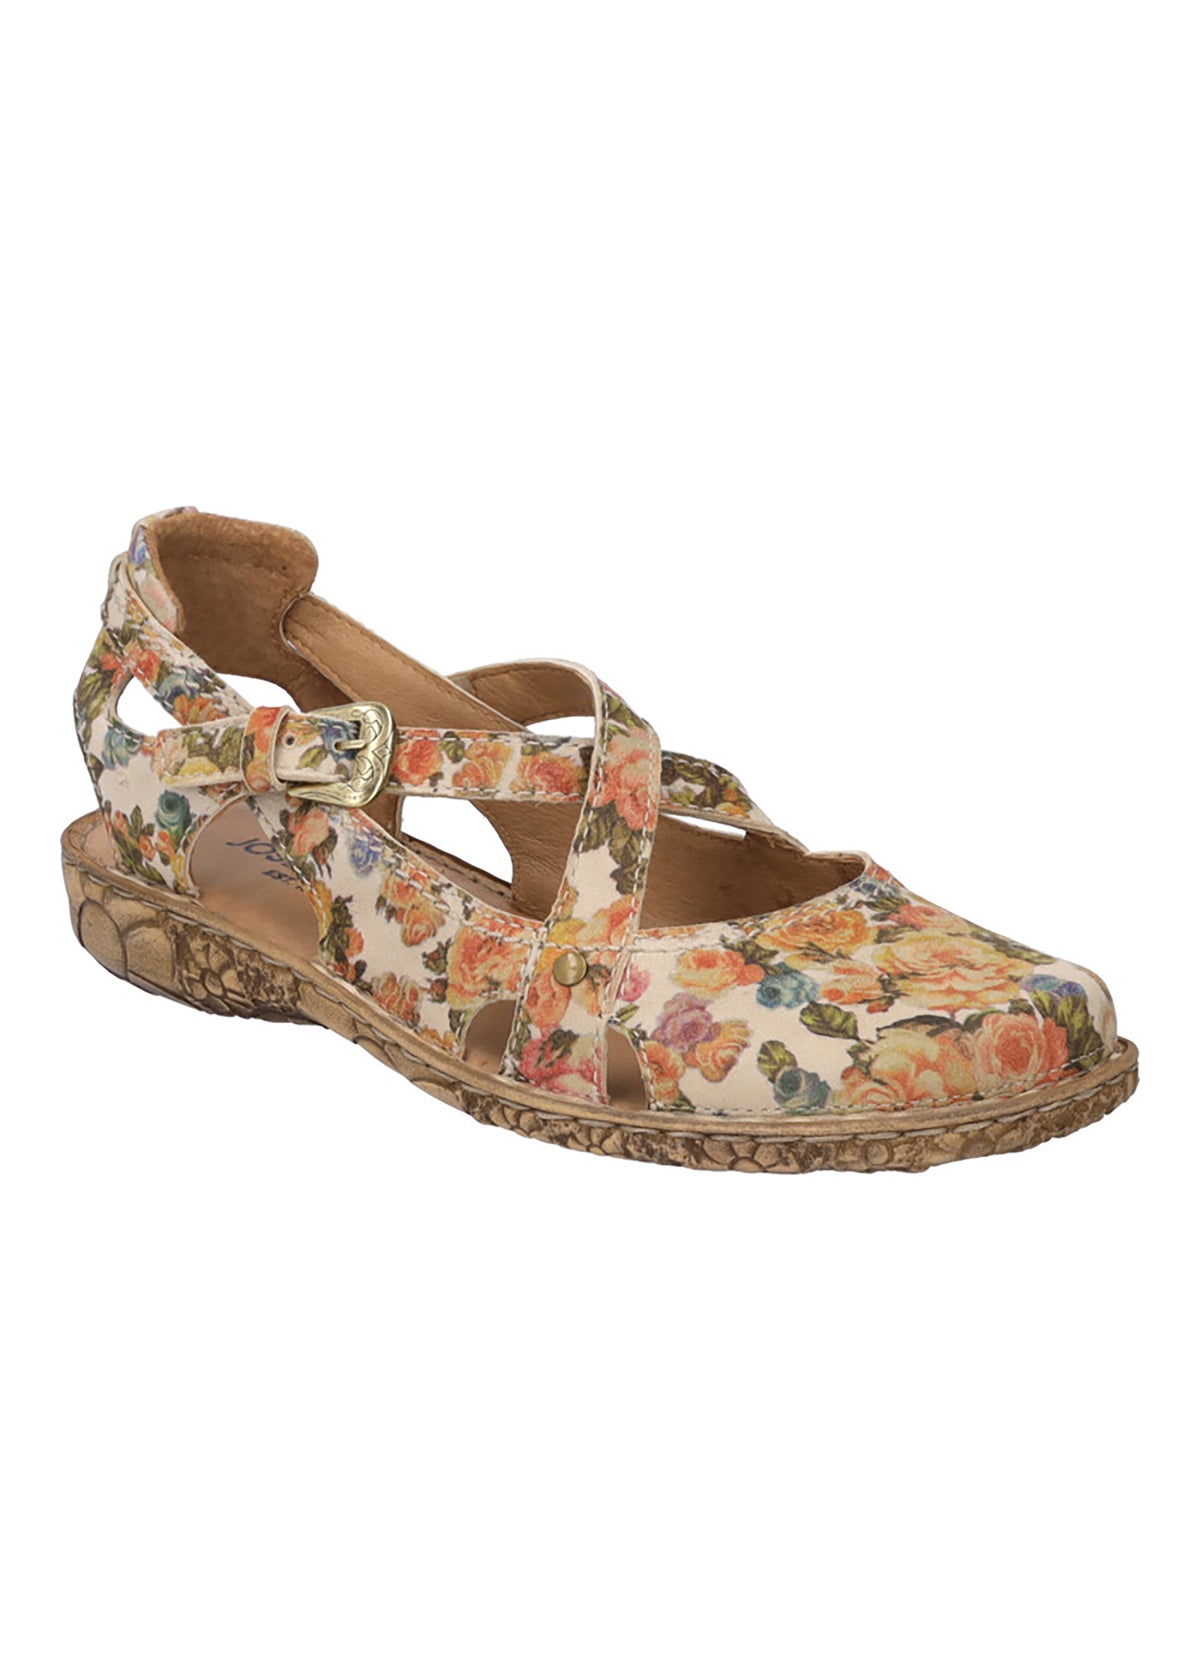 Closed Toe Sandals - Light Tone Floral Patterned Leather, Rosalie 13